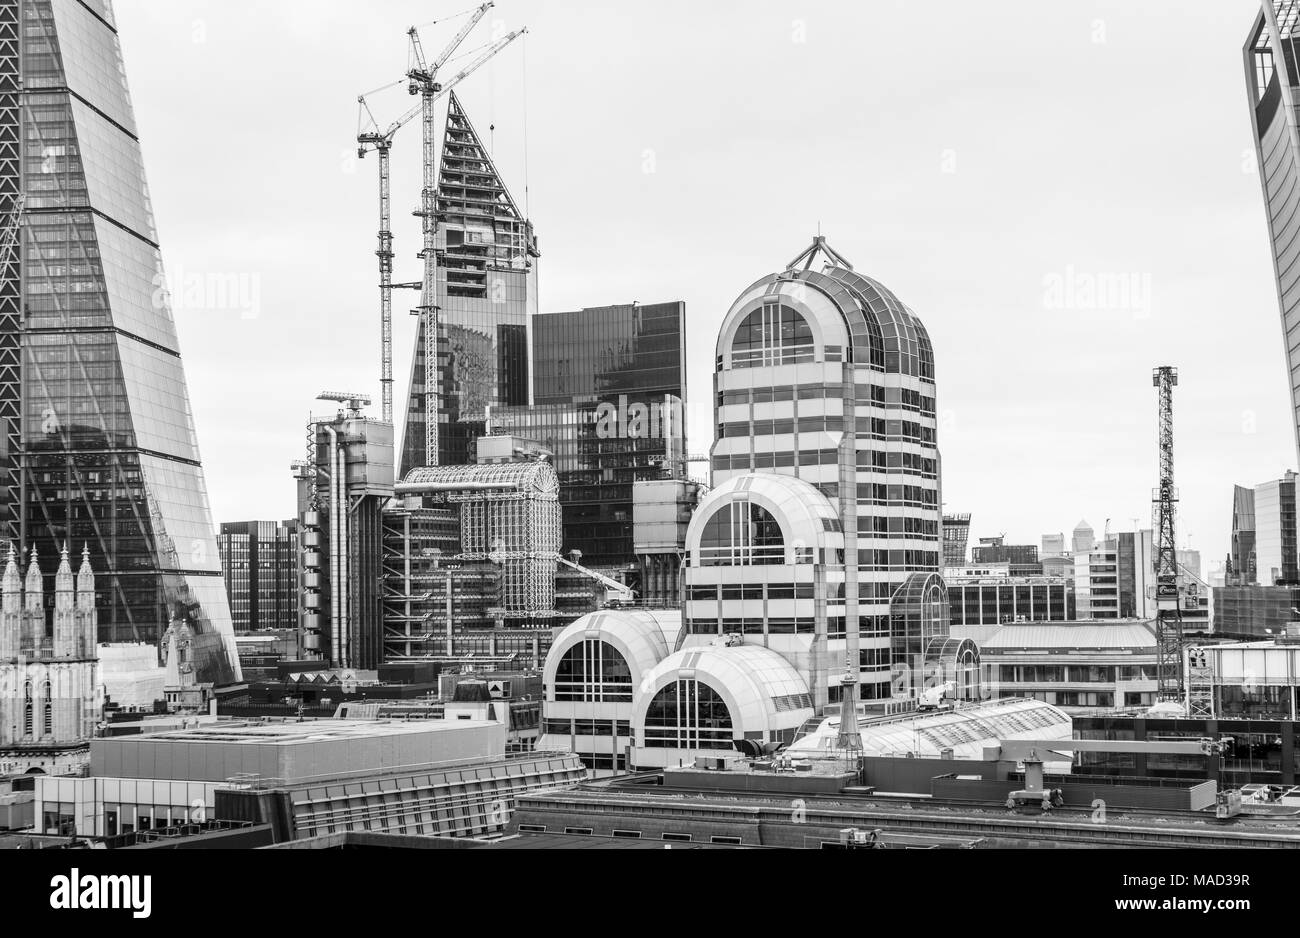 The Scalpel under construction behind the Lloyds Building flanked by the Cheesegrater, Willis Building and 20 Gracechurch Street, City of London, UK Stock Photo